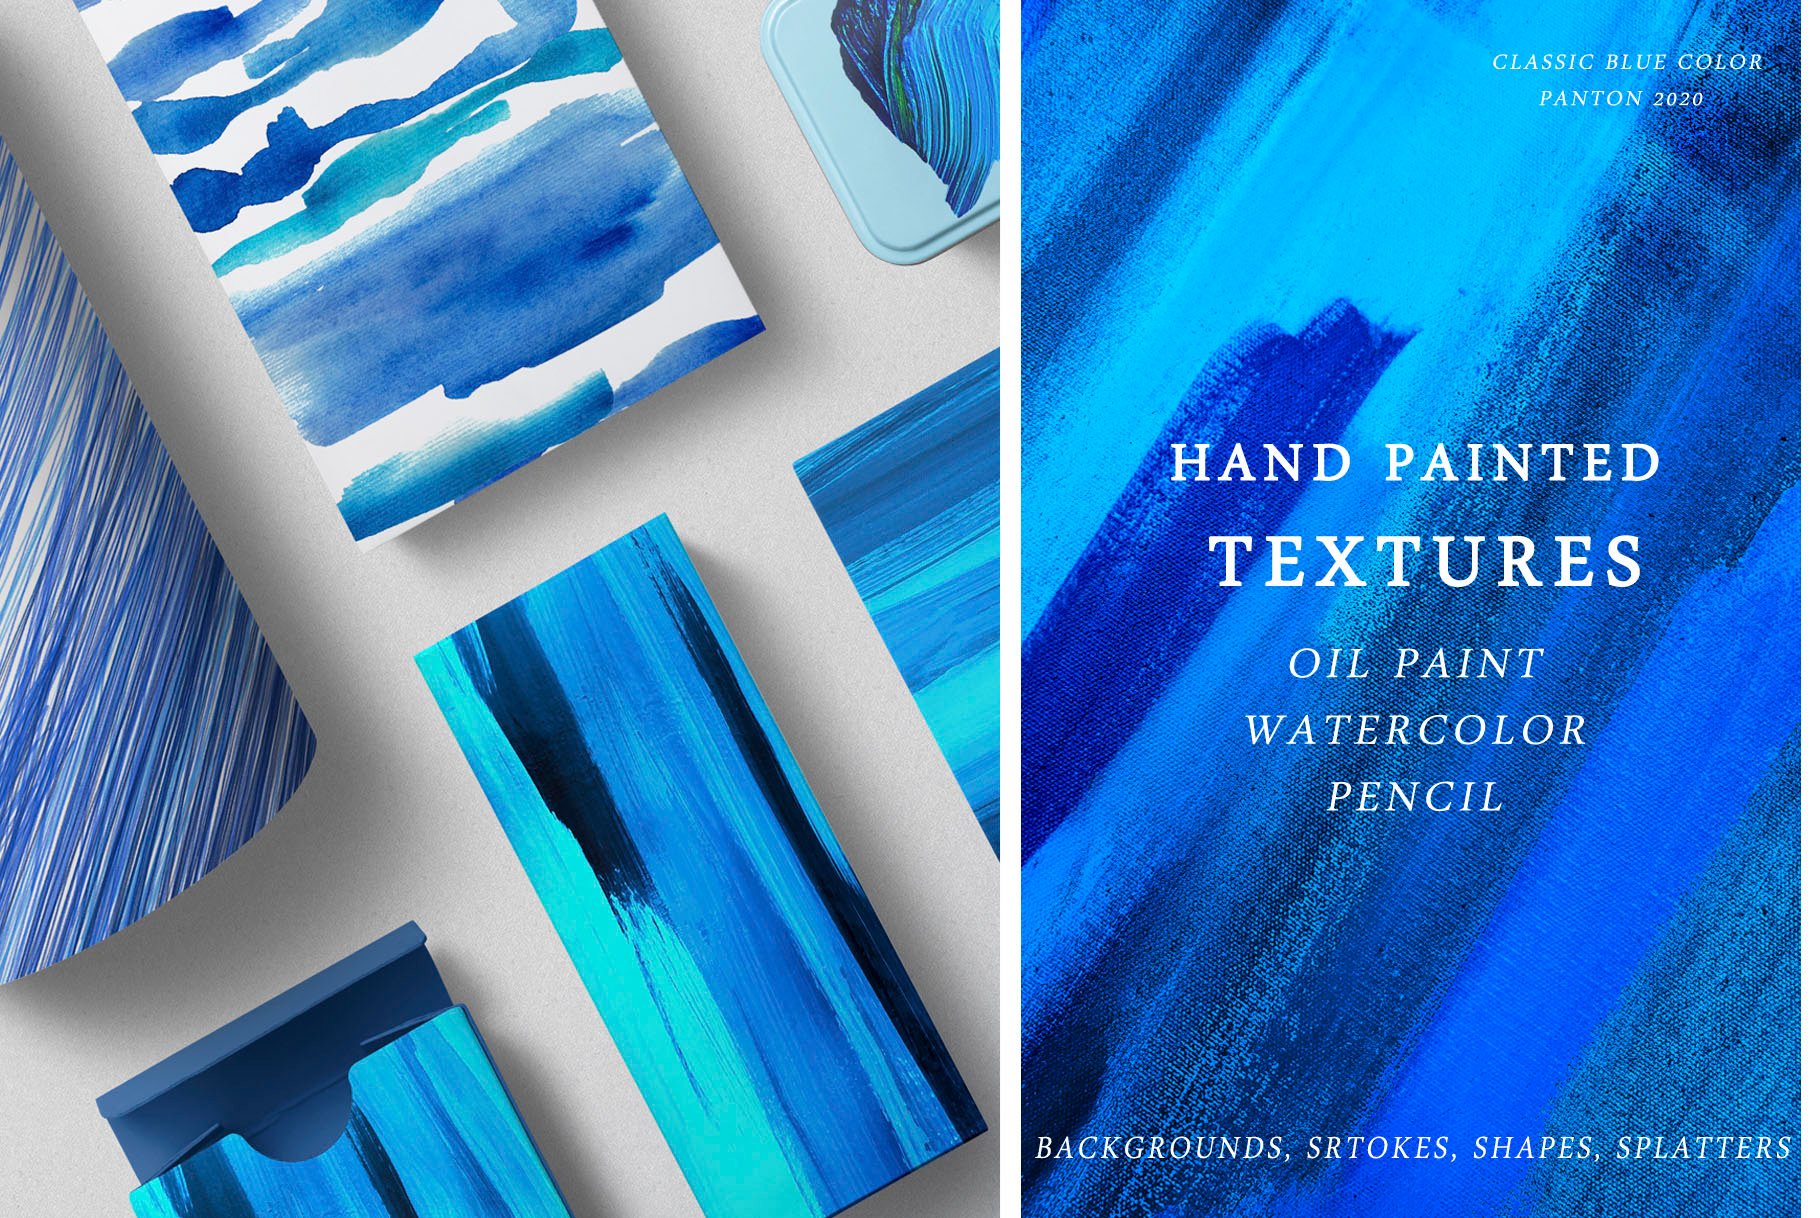 Hand Painted Textures. Classic Blue Color